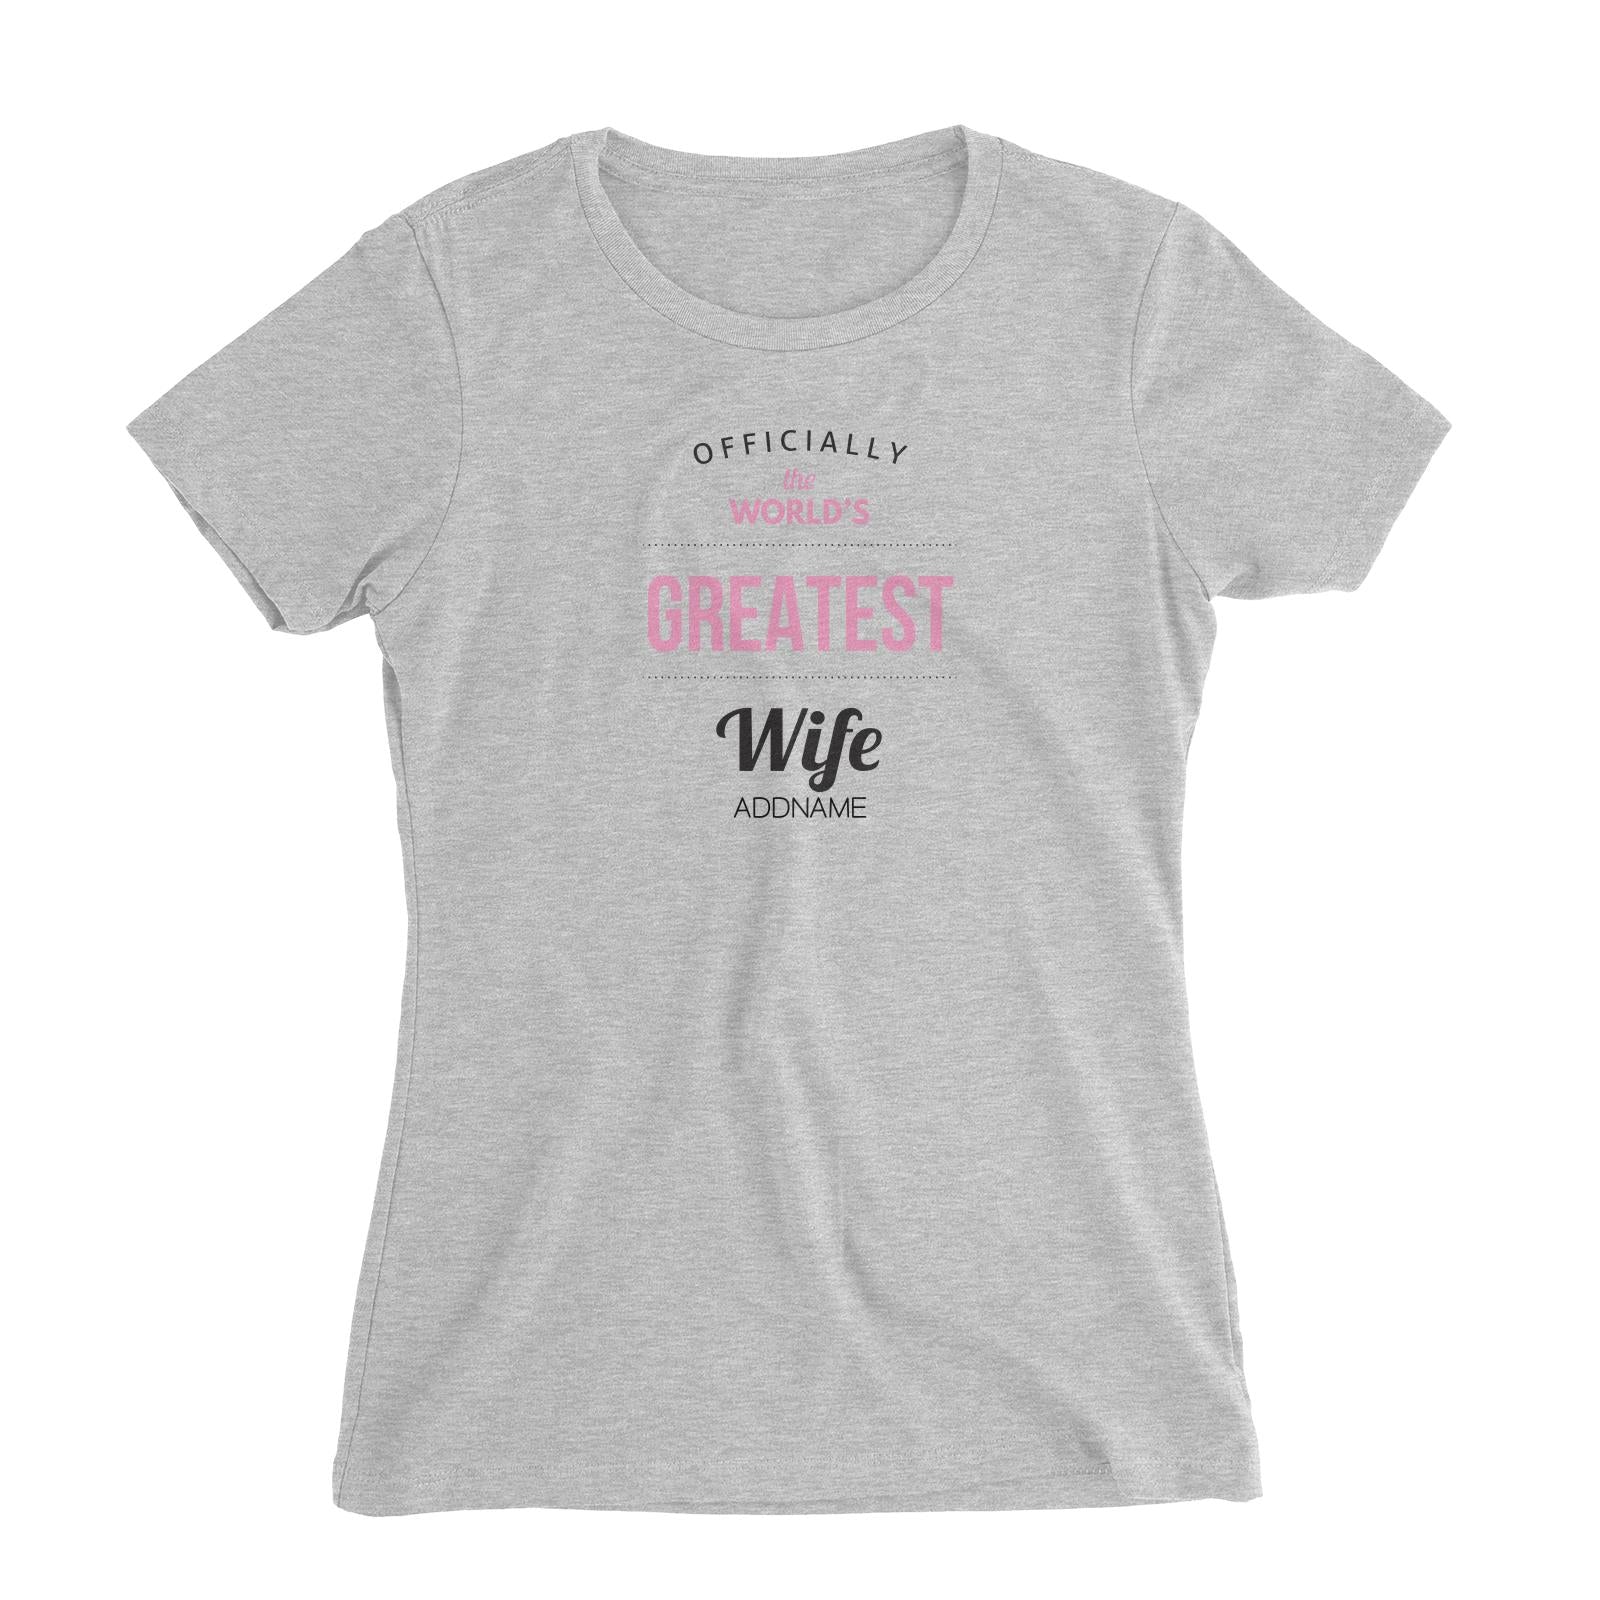 Husband and Wife Officially The World's Geatest Wife Addname Women Slim Fit T-Shirt